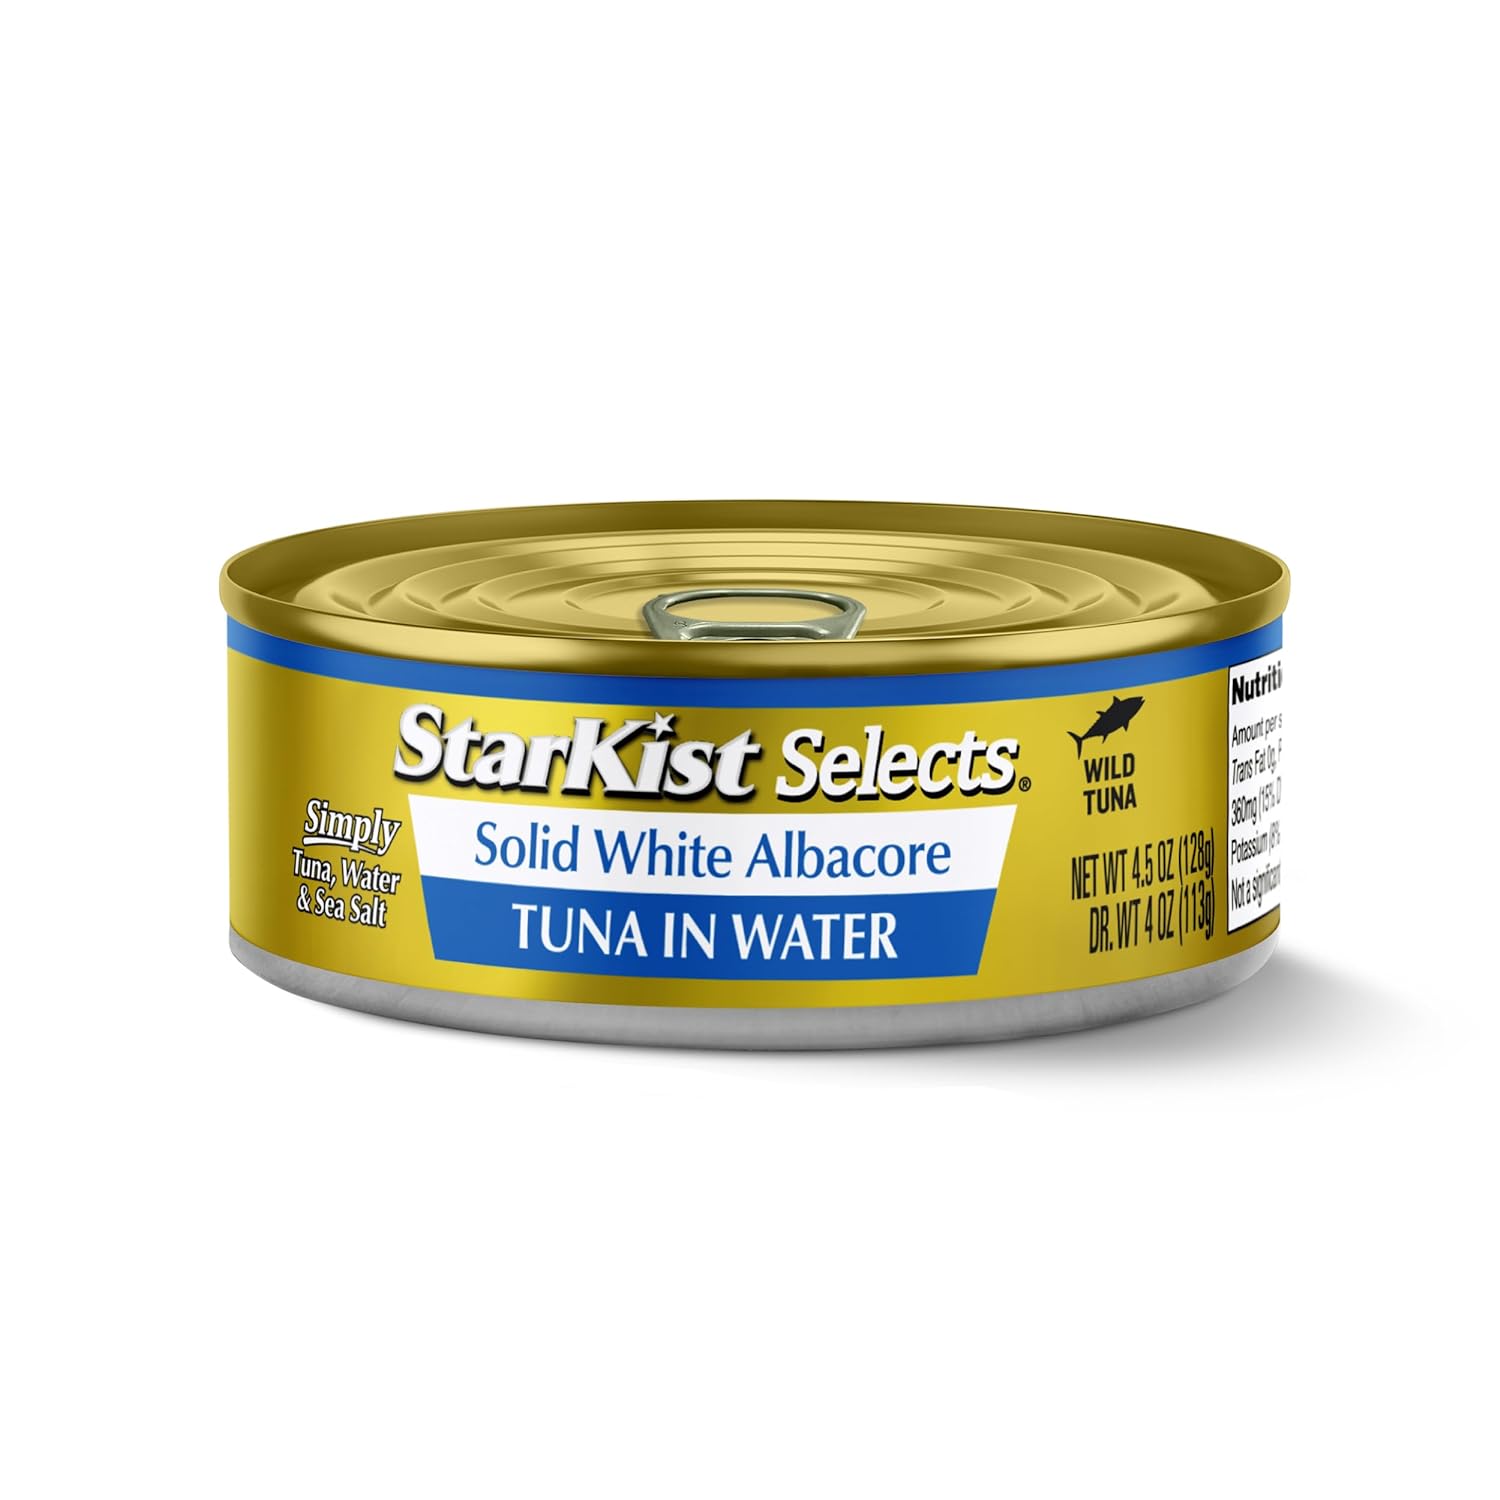 StarKist Selects Solid White Albacore Tuna In Water - 4.5 oz Can